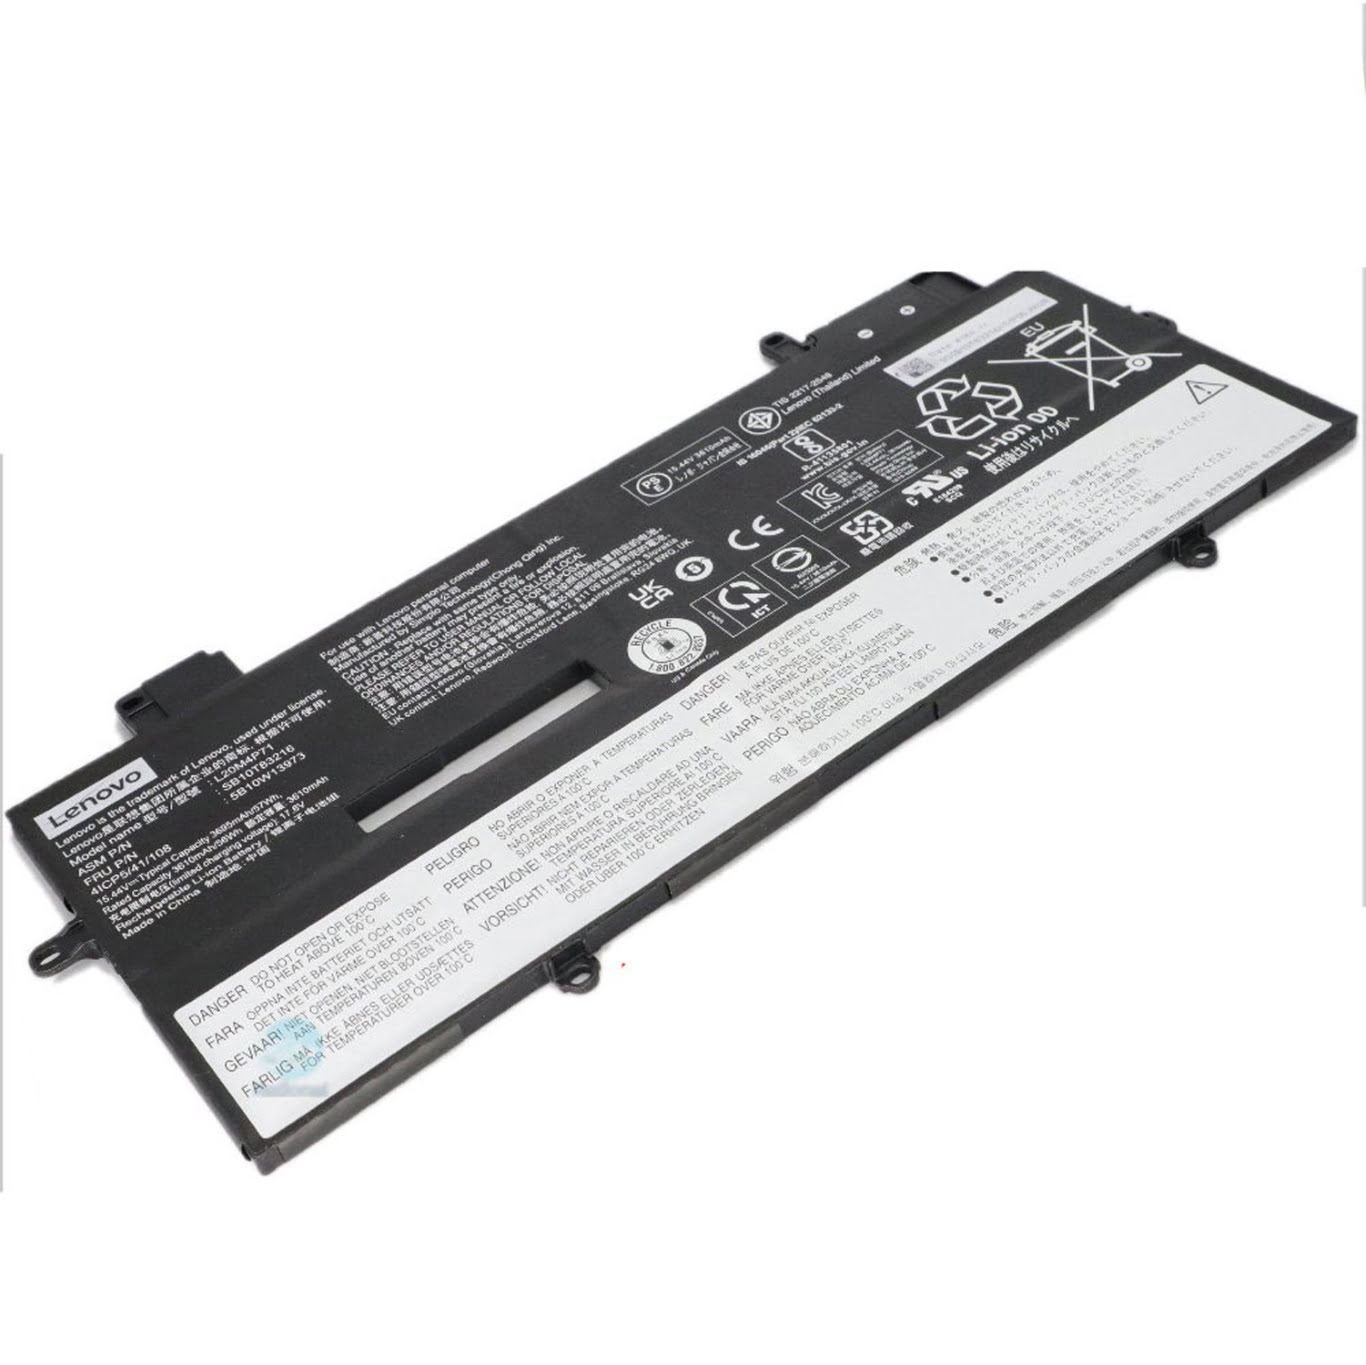 5B10W13974, 5B10W13975 replacement Laptop Battery for Lenovo ThinkPad